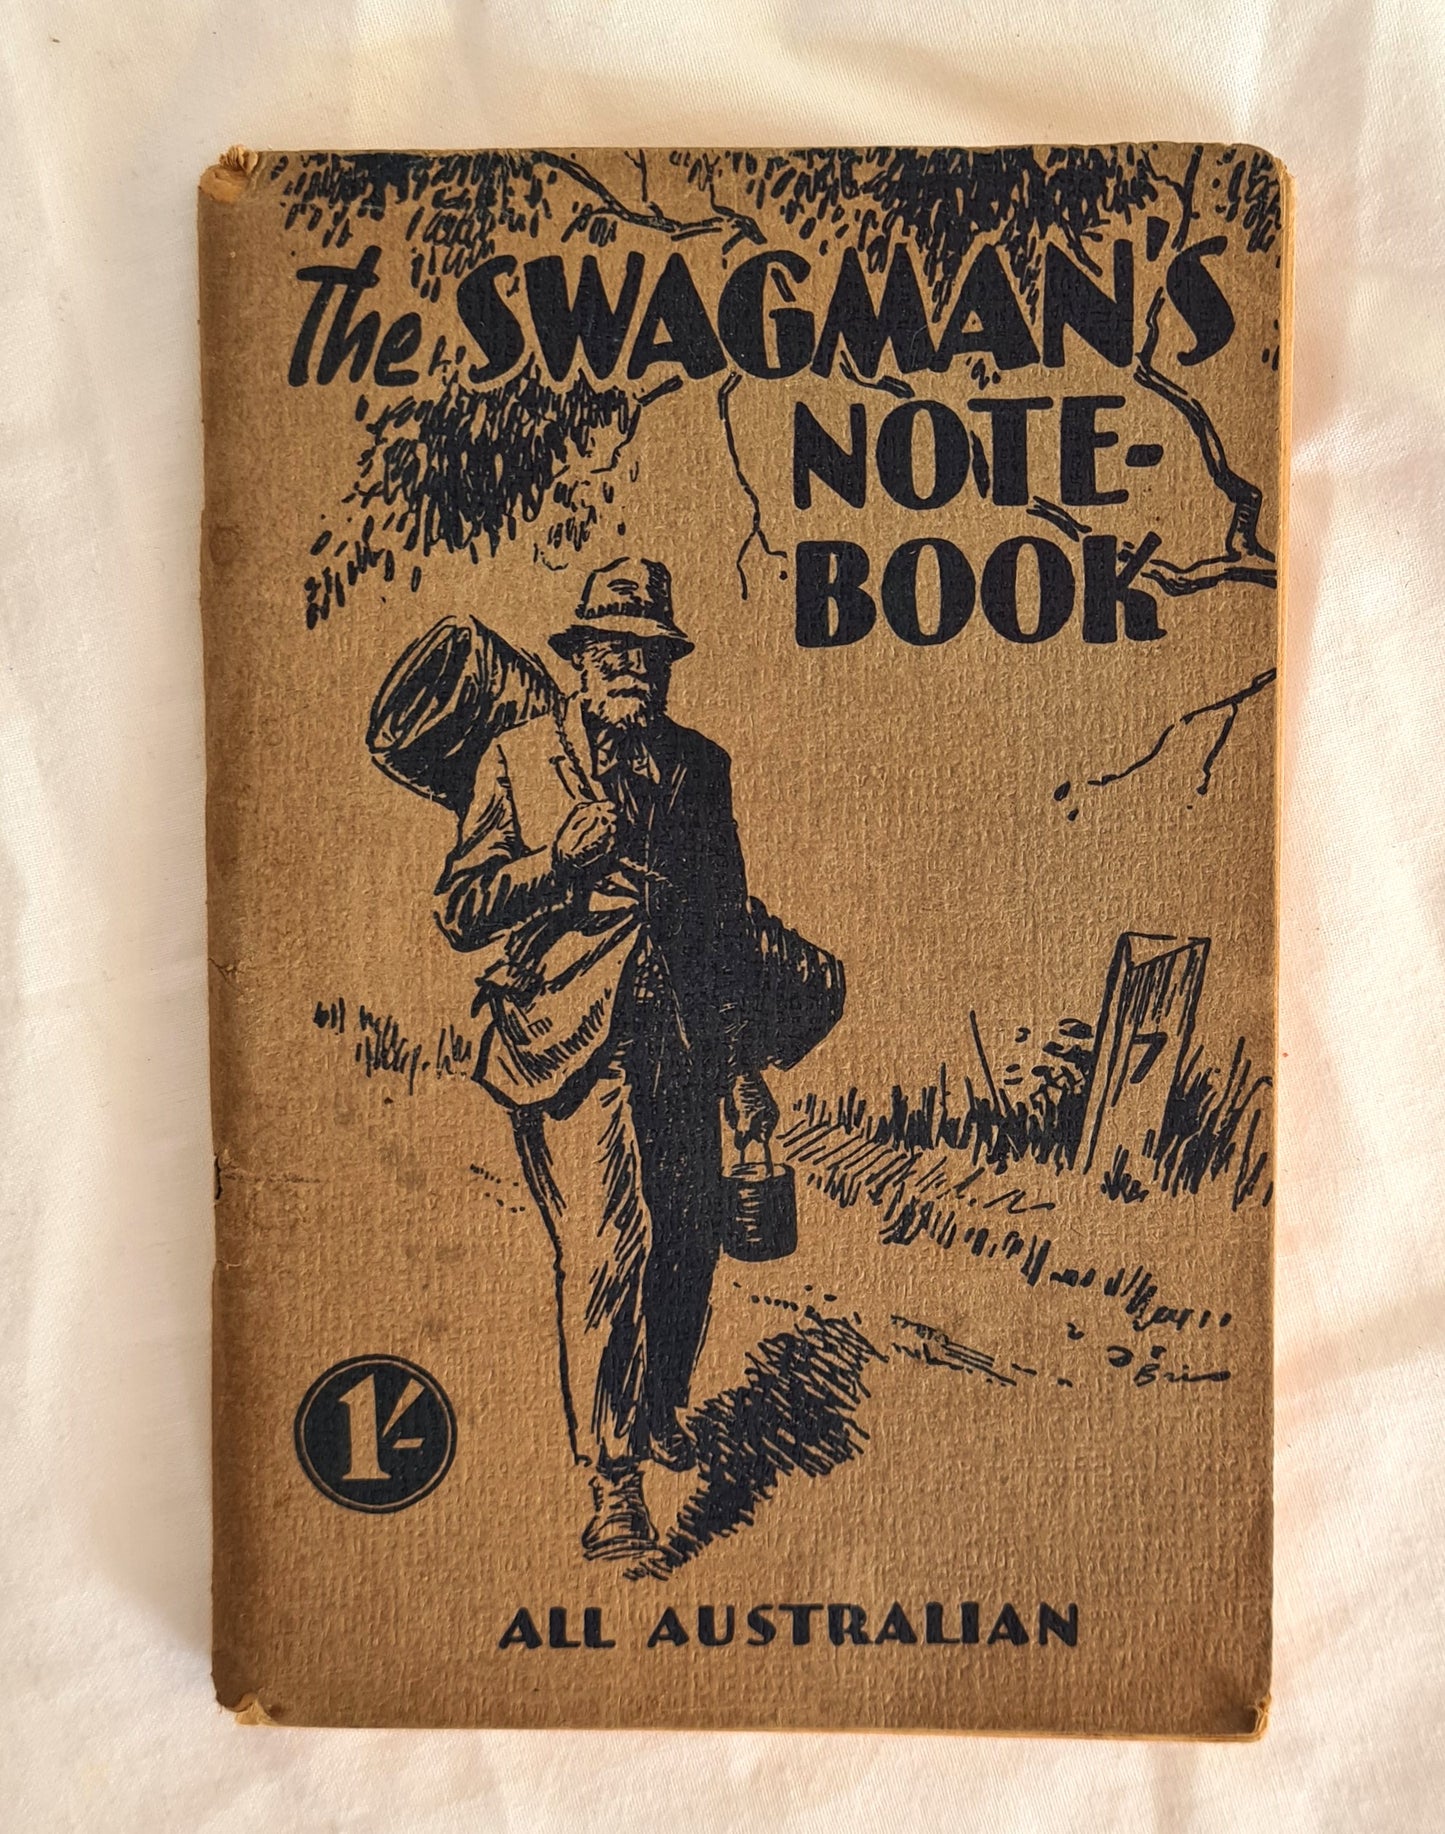 The Swagman’s Note-book  An Anthology of Australian Prose and Verse  Edited by Charles Barrett